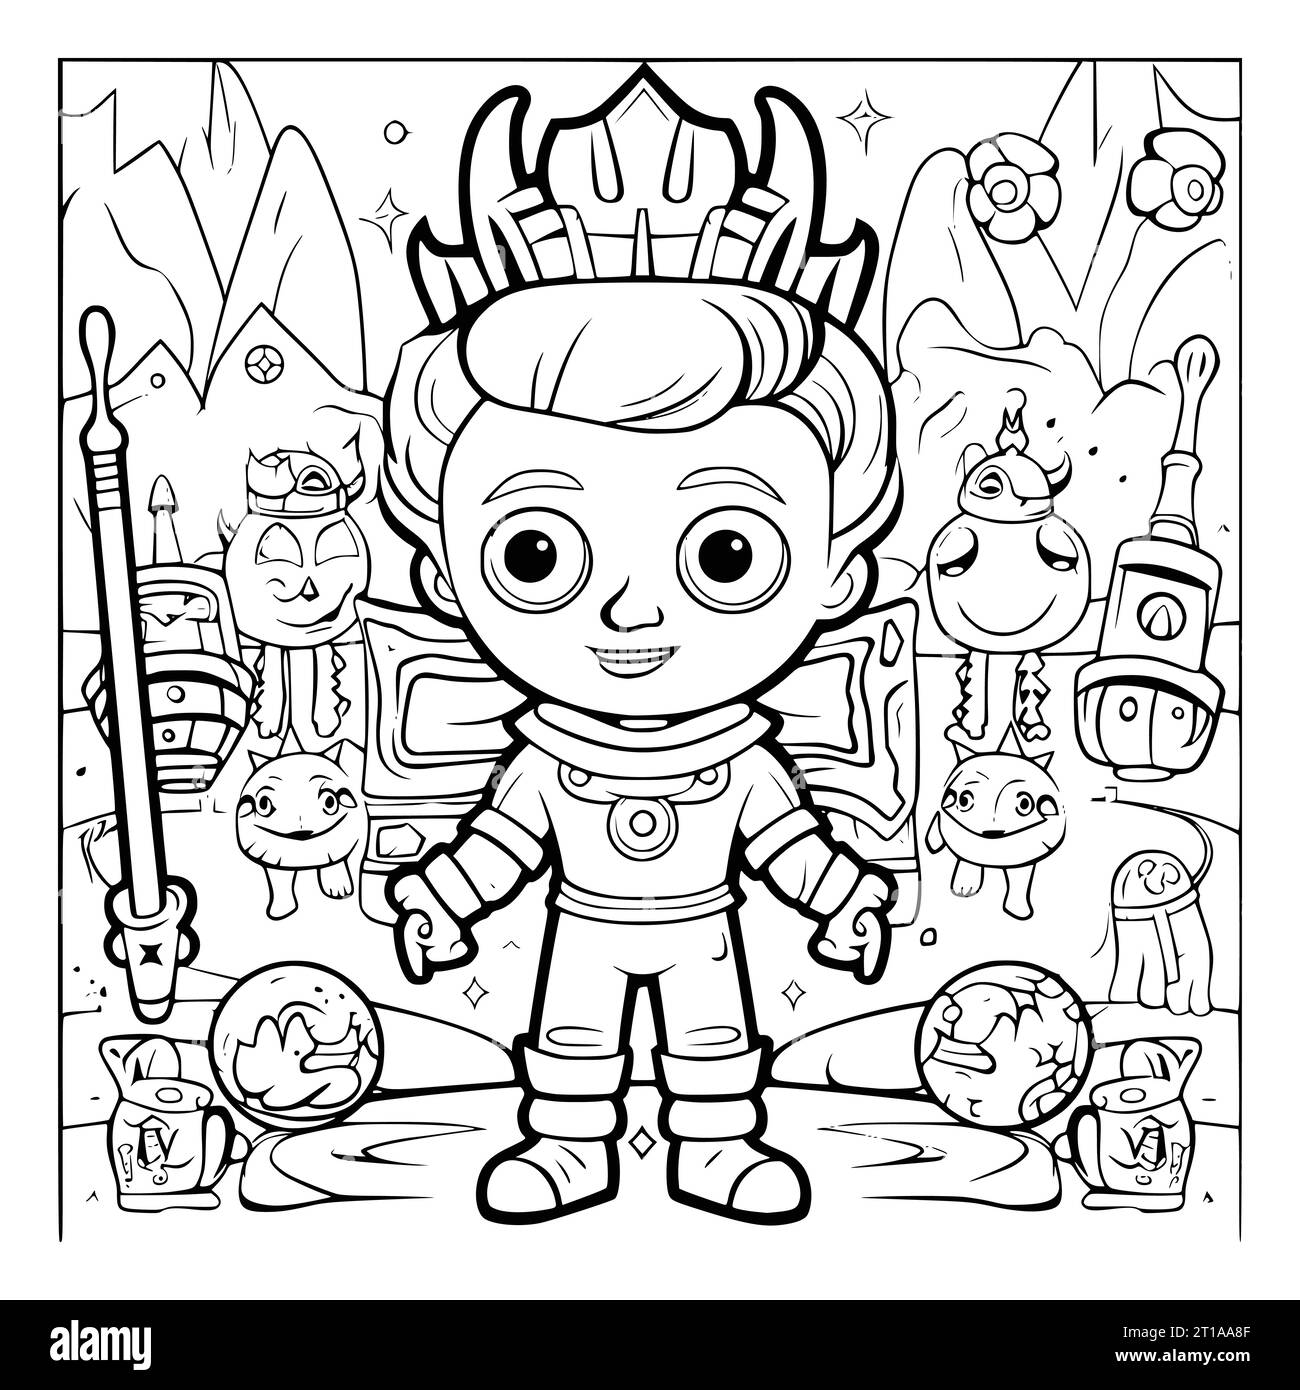 Cartoon Coloring Page Drawing For Kids Stock Vector Image & Art - Alamy